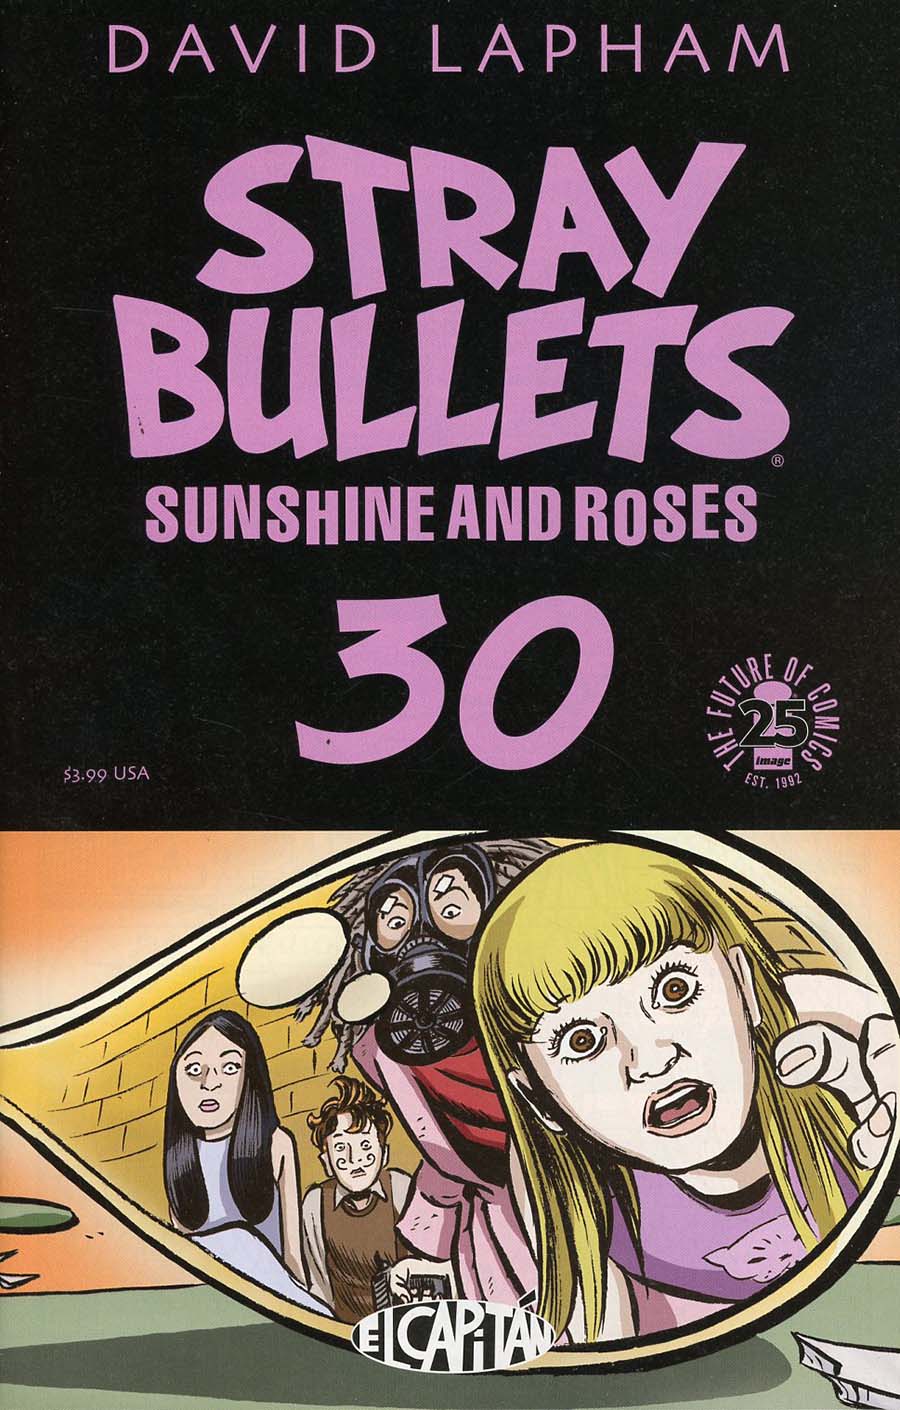 Stray Bullets Sunshine And Roses #30